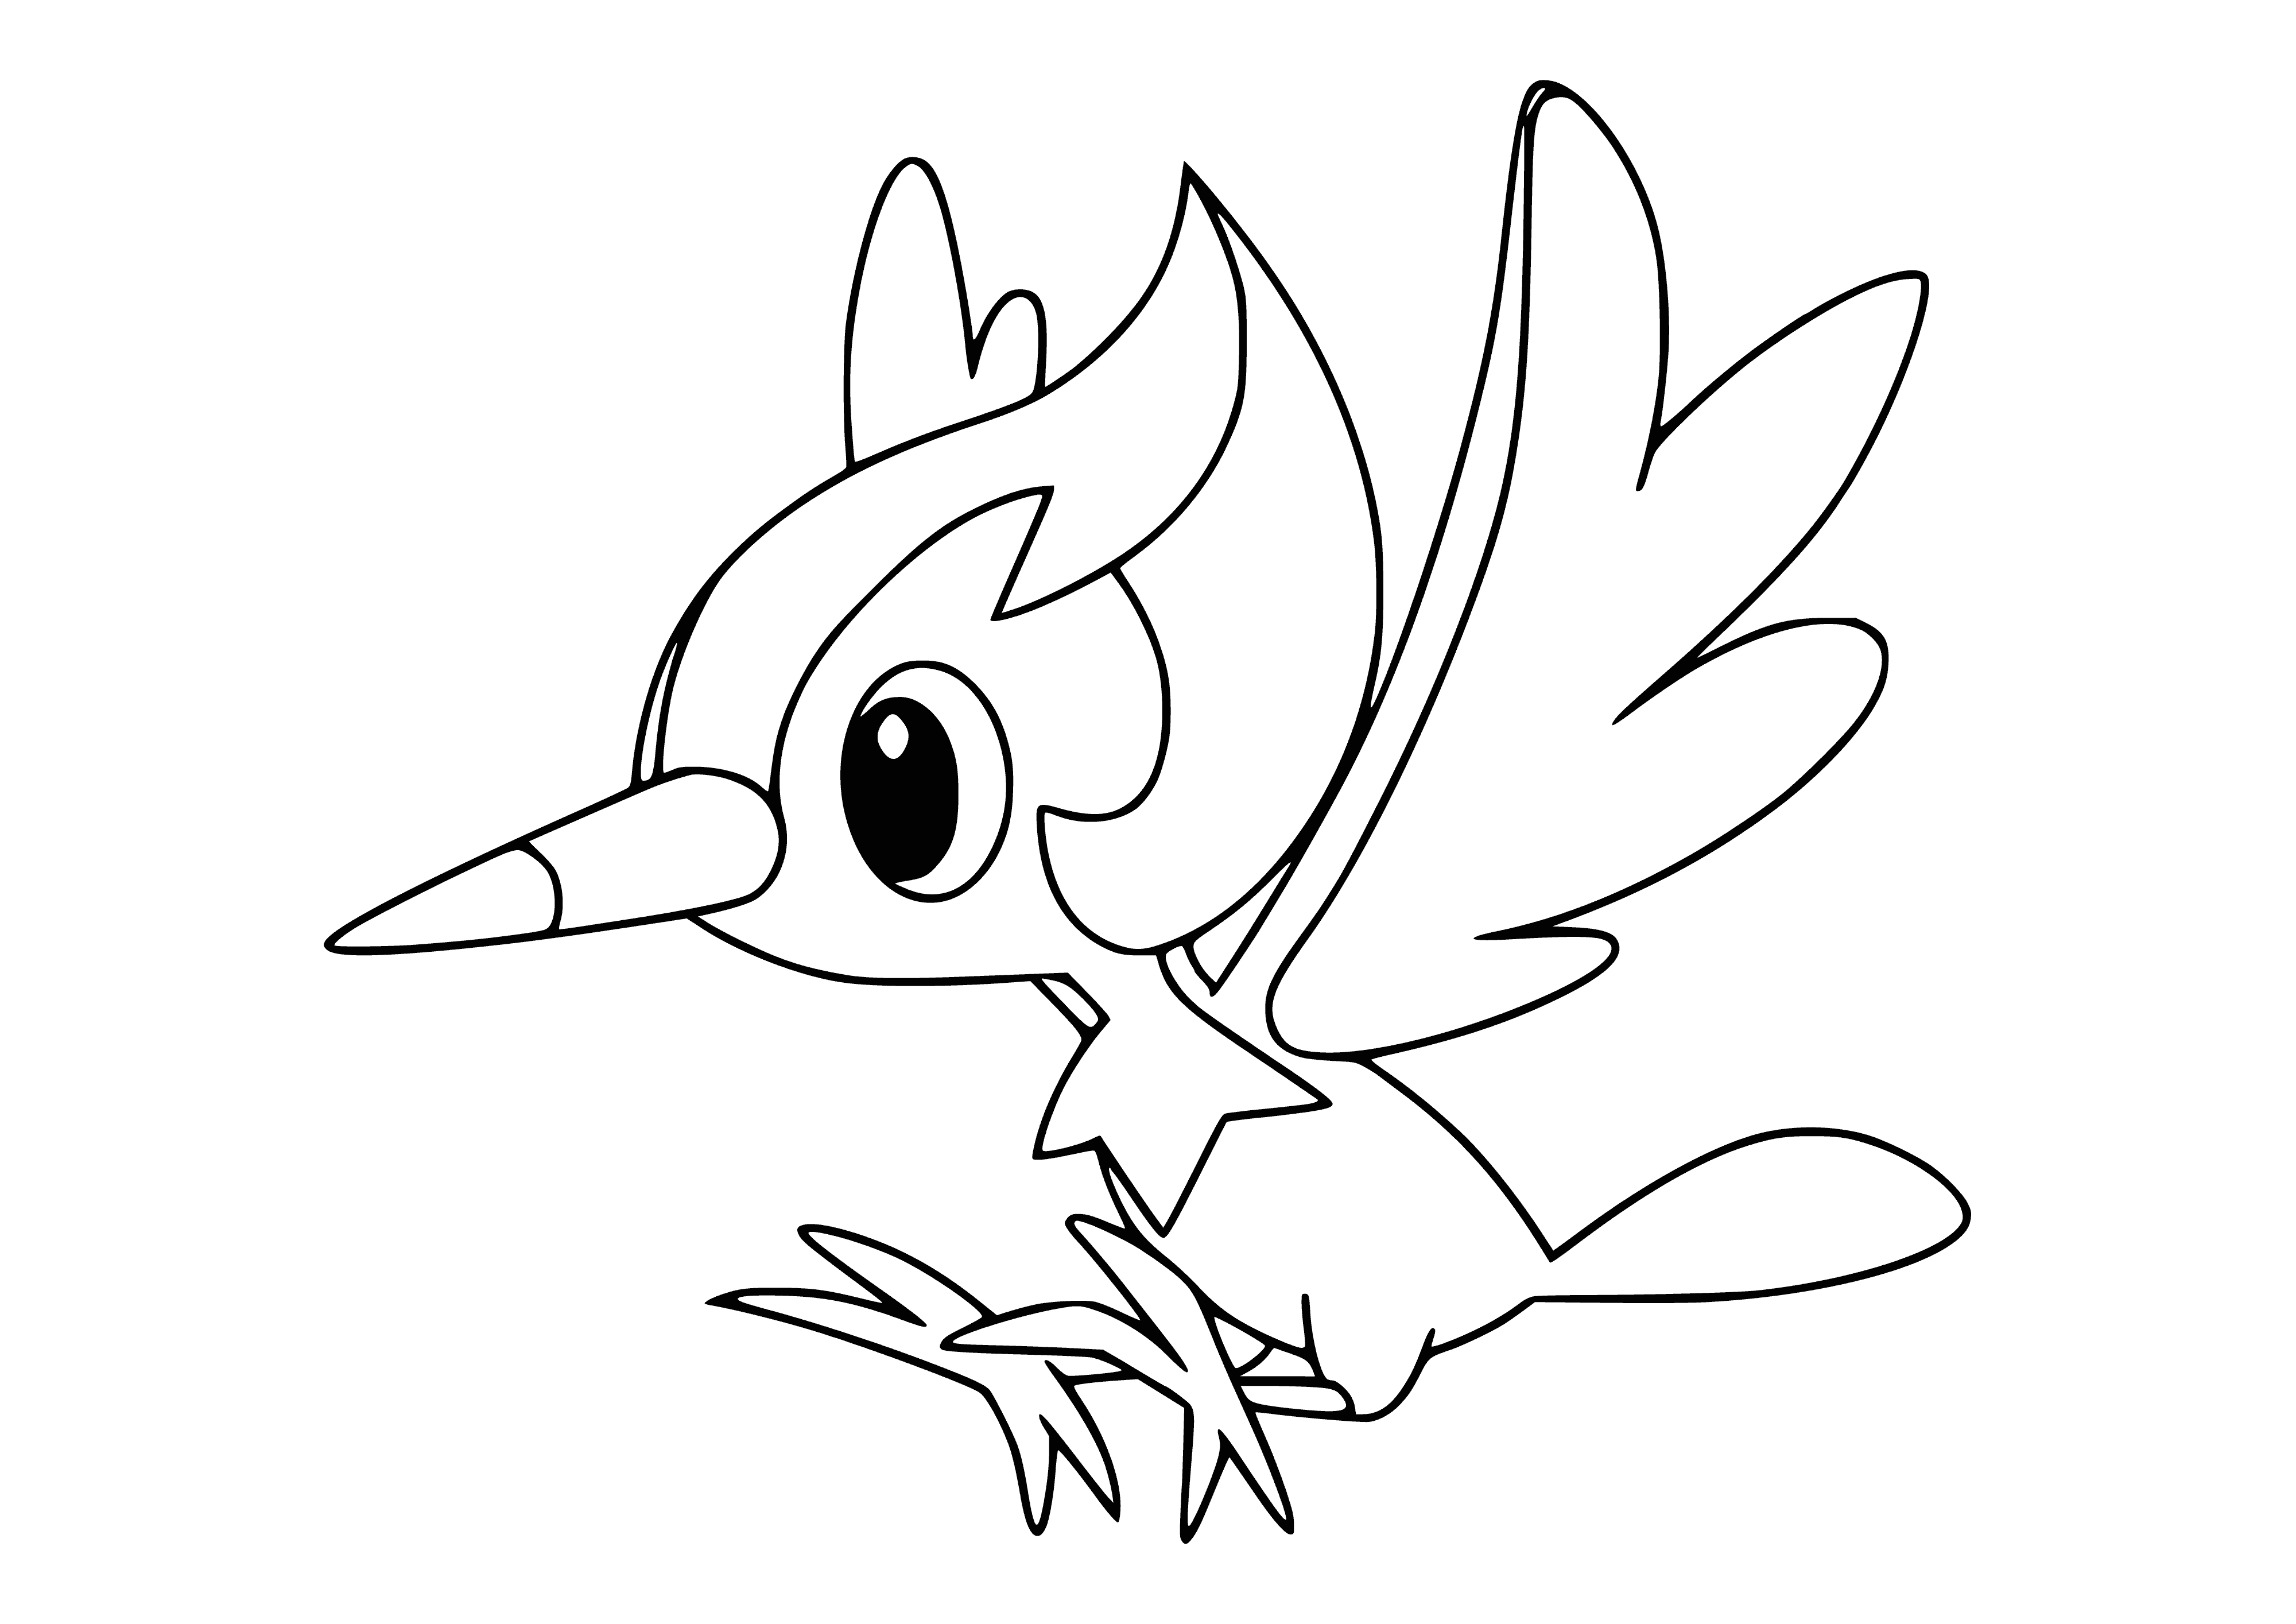 coloring page: A small PokÃ©mon with a red crest, black eyes, black beak, gray wings and black stripes, gray legs + black claws.